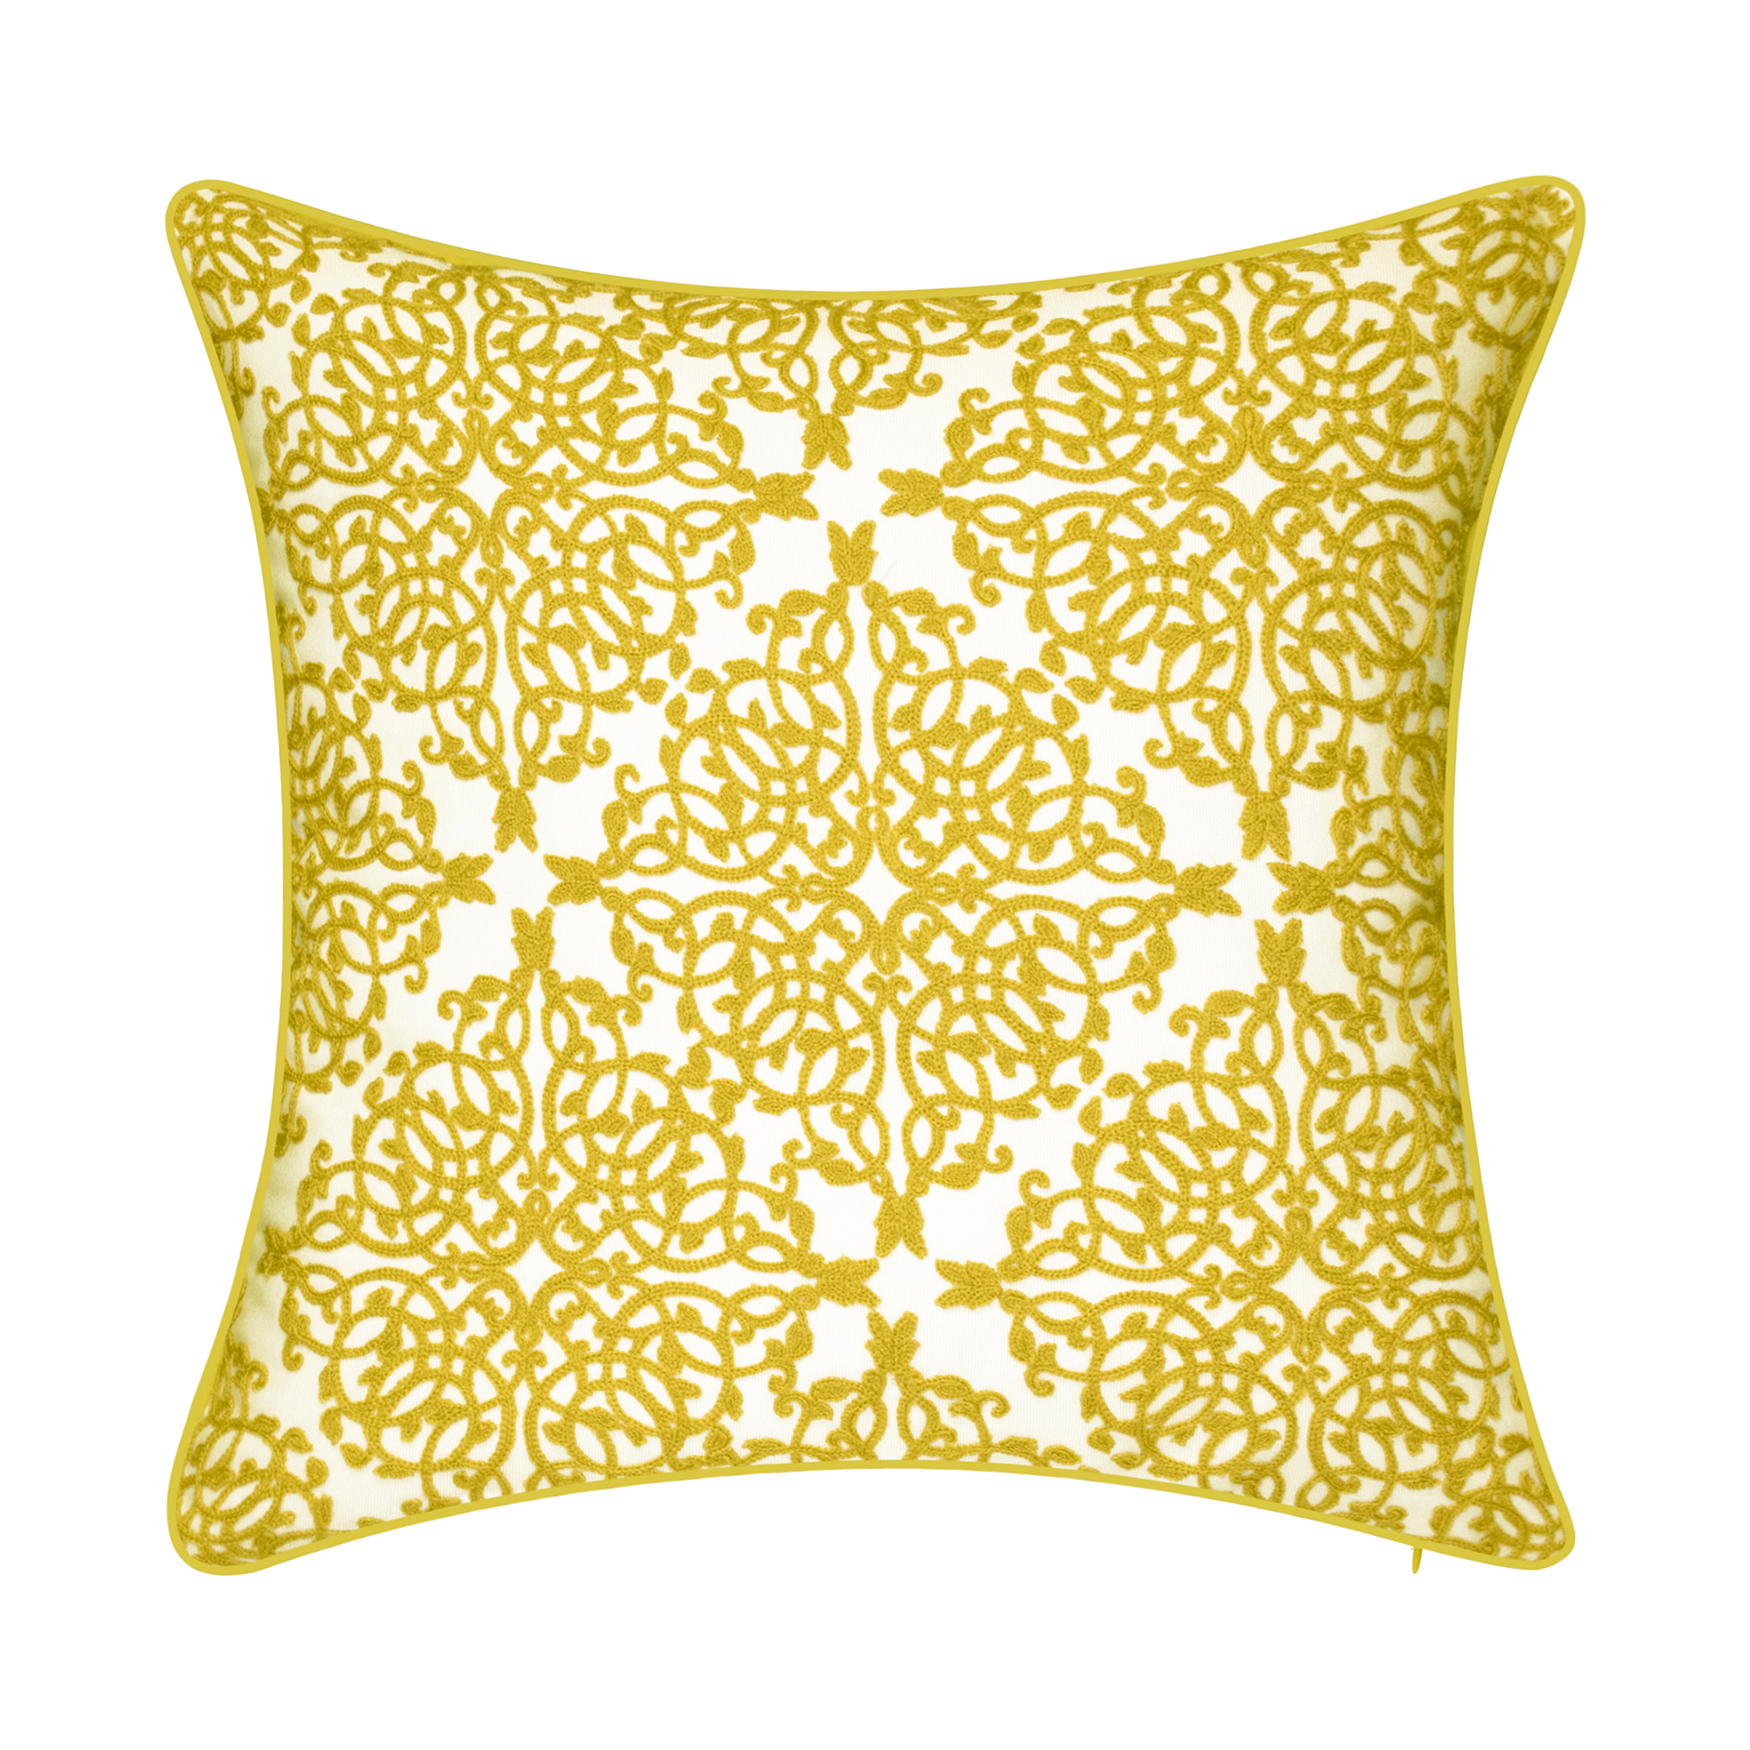 Indoor & Outdoor Embroidered Lace Decorative Pillow, 